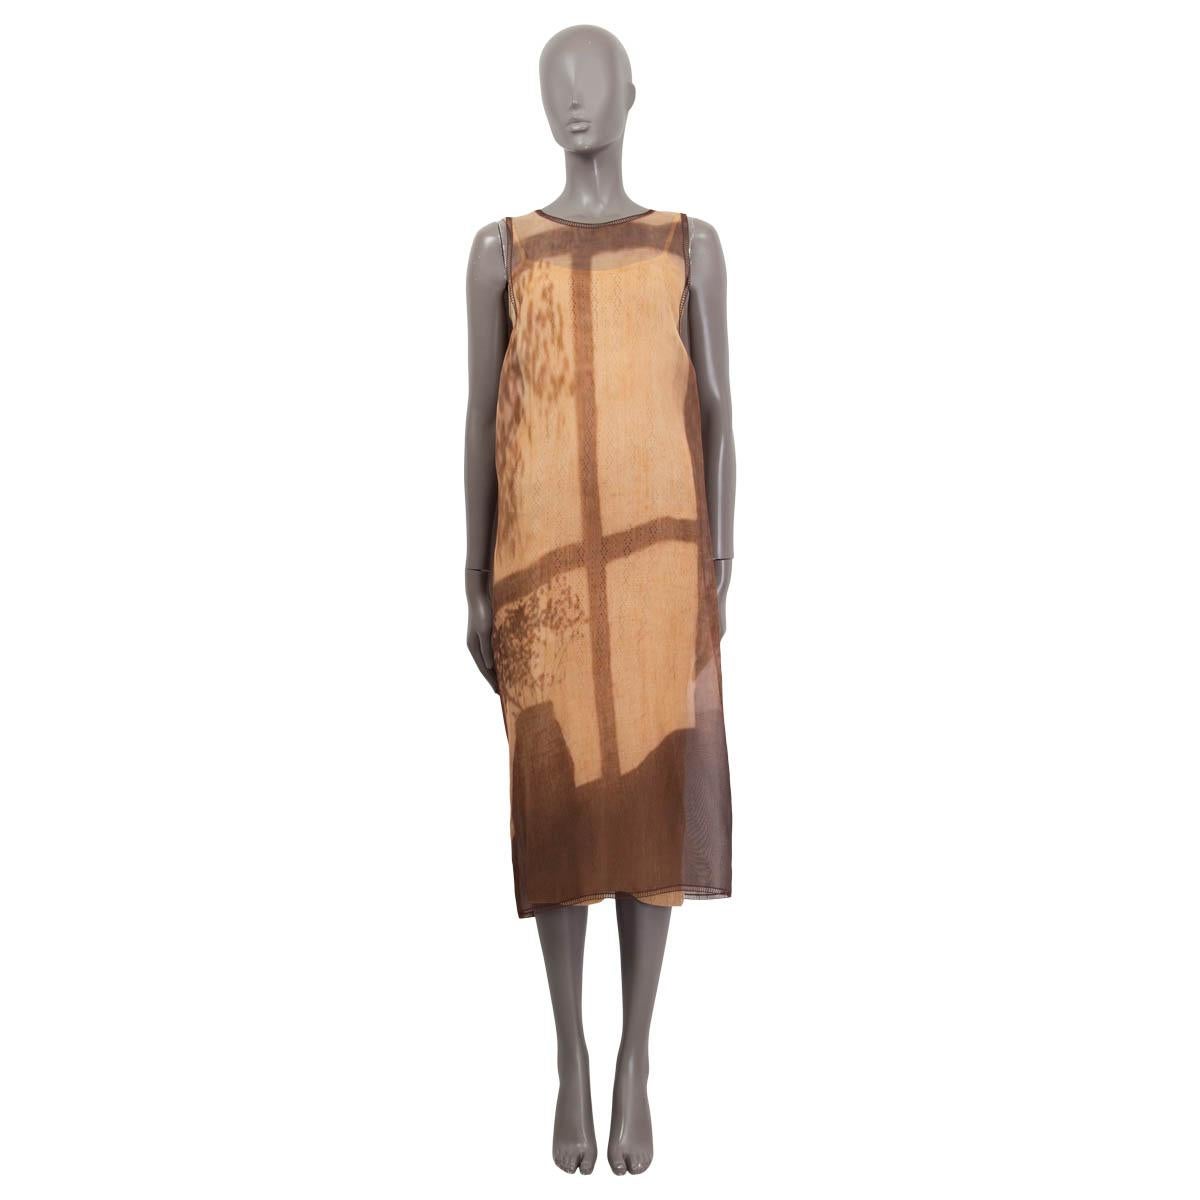 100% authentic Fendi Spring/Summer 2021 sleeveless sheer woven silk mid-length dress in beige and brown silk (assumed cause tag is missing). Features printed graphic in tones of brown and beige and has a modified wrap construction. Has an